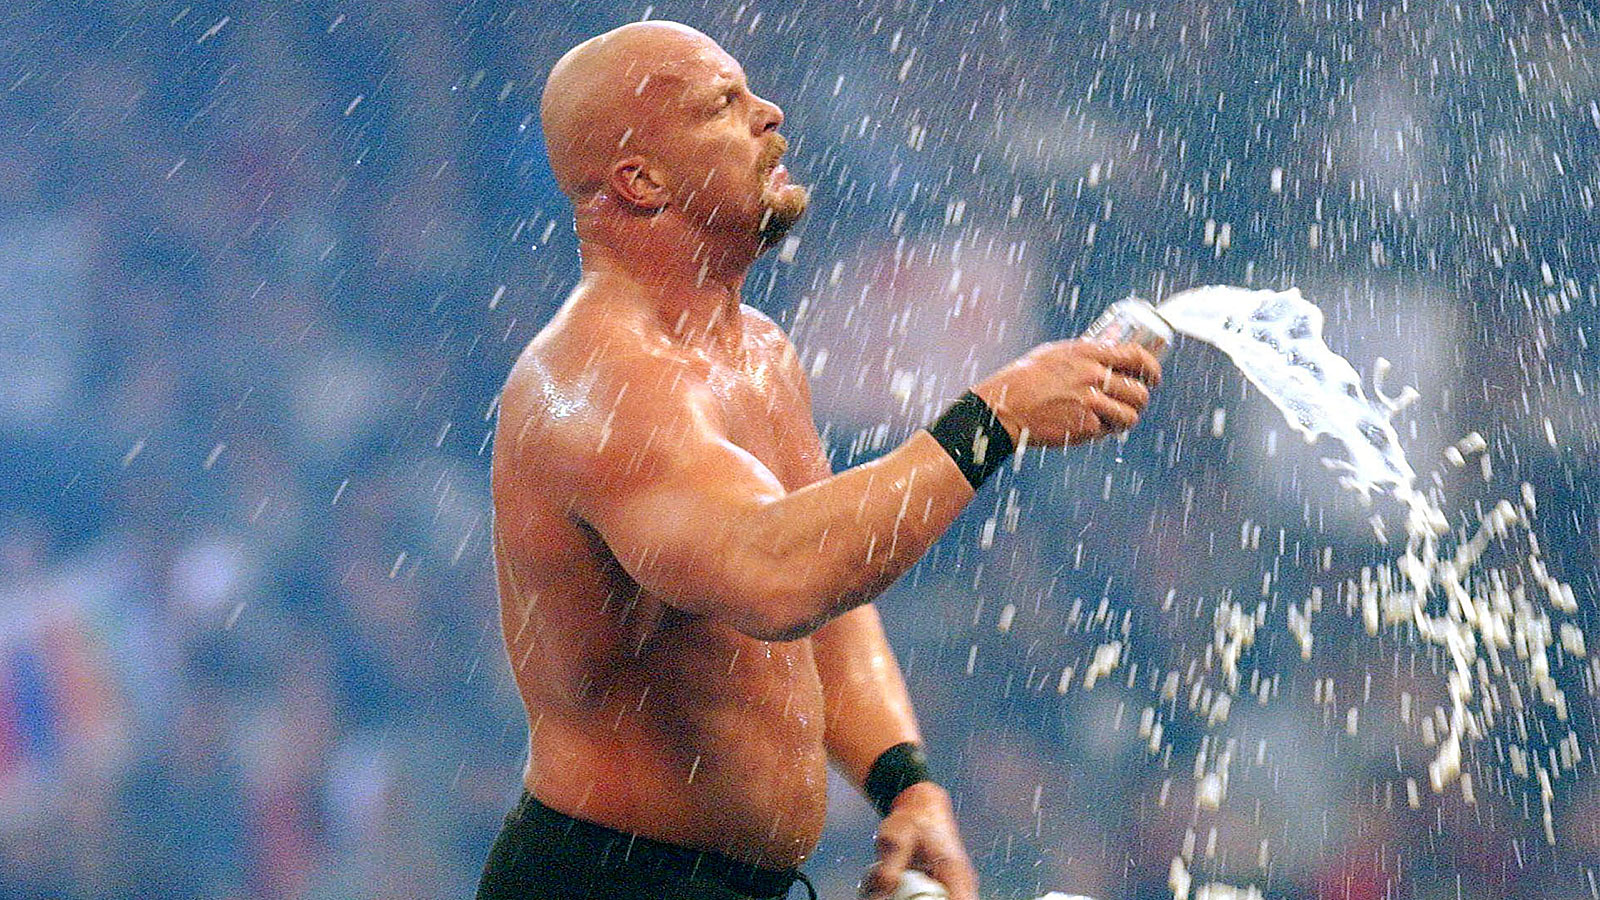 Years Ago Today: Steve Austin Rocks Wrestling With His 'Austin 3:16' Promo